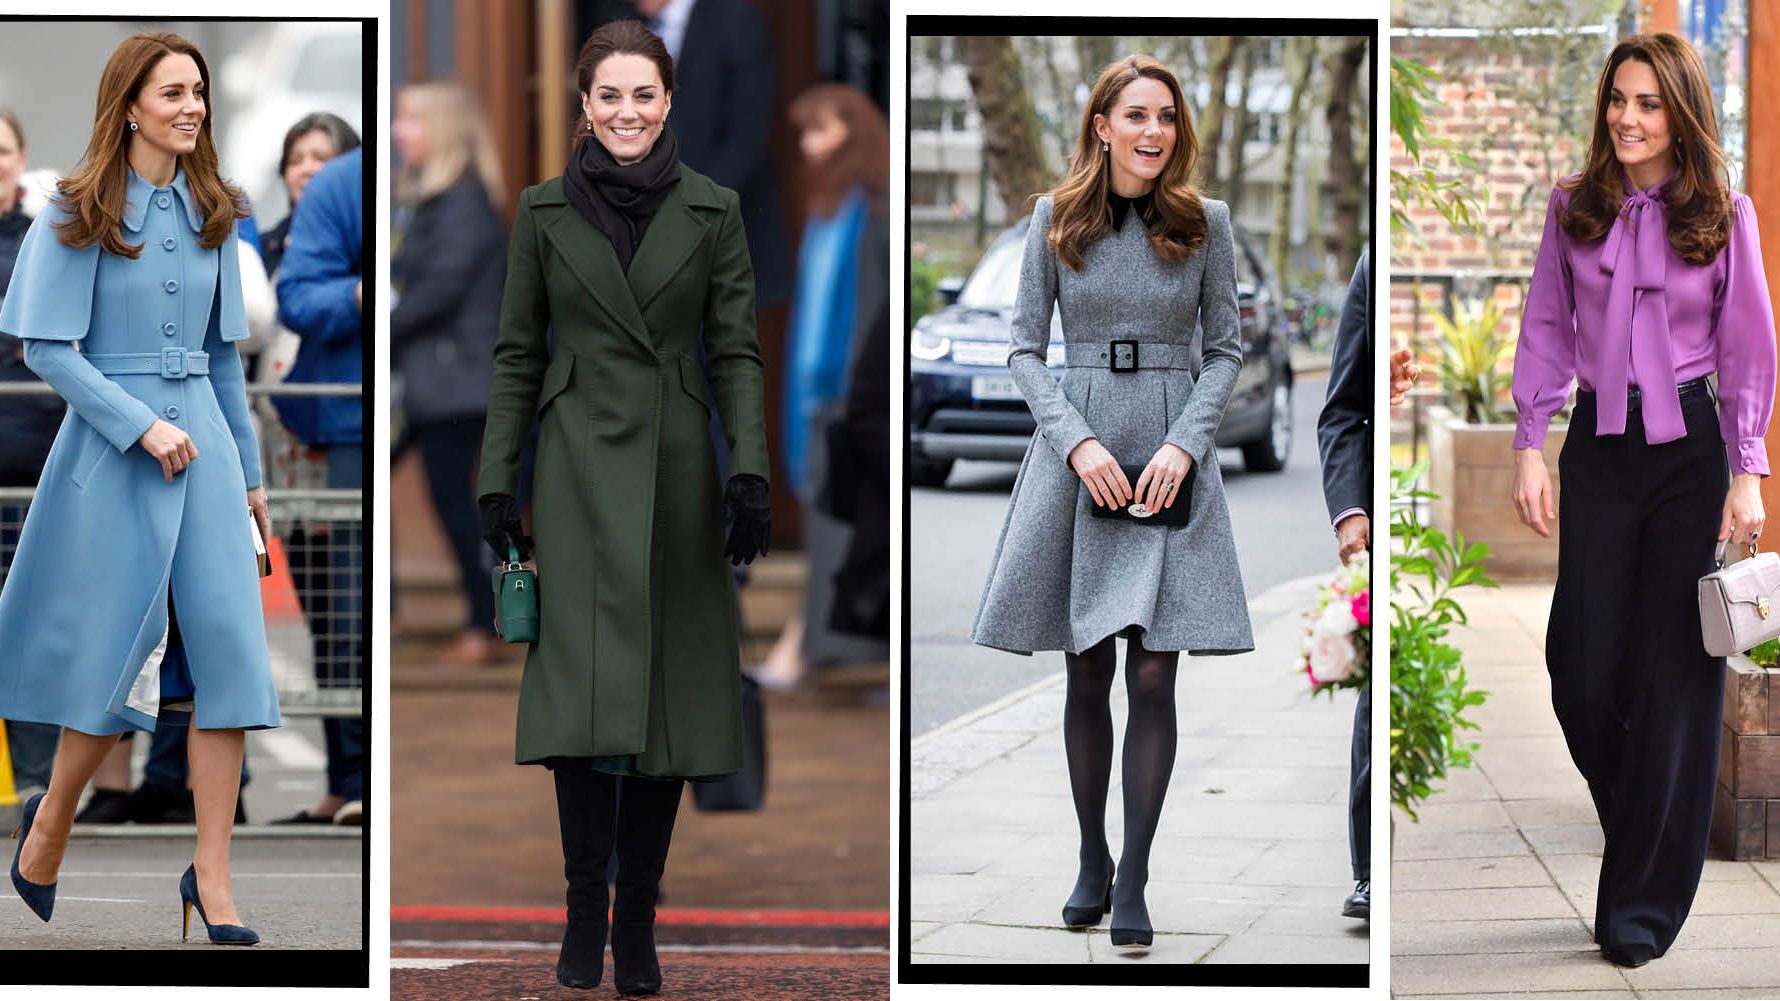 Kate Middleton April 2019: Outfits, Photos & Style Insights